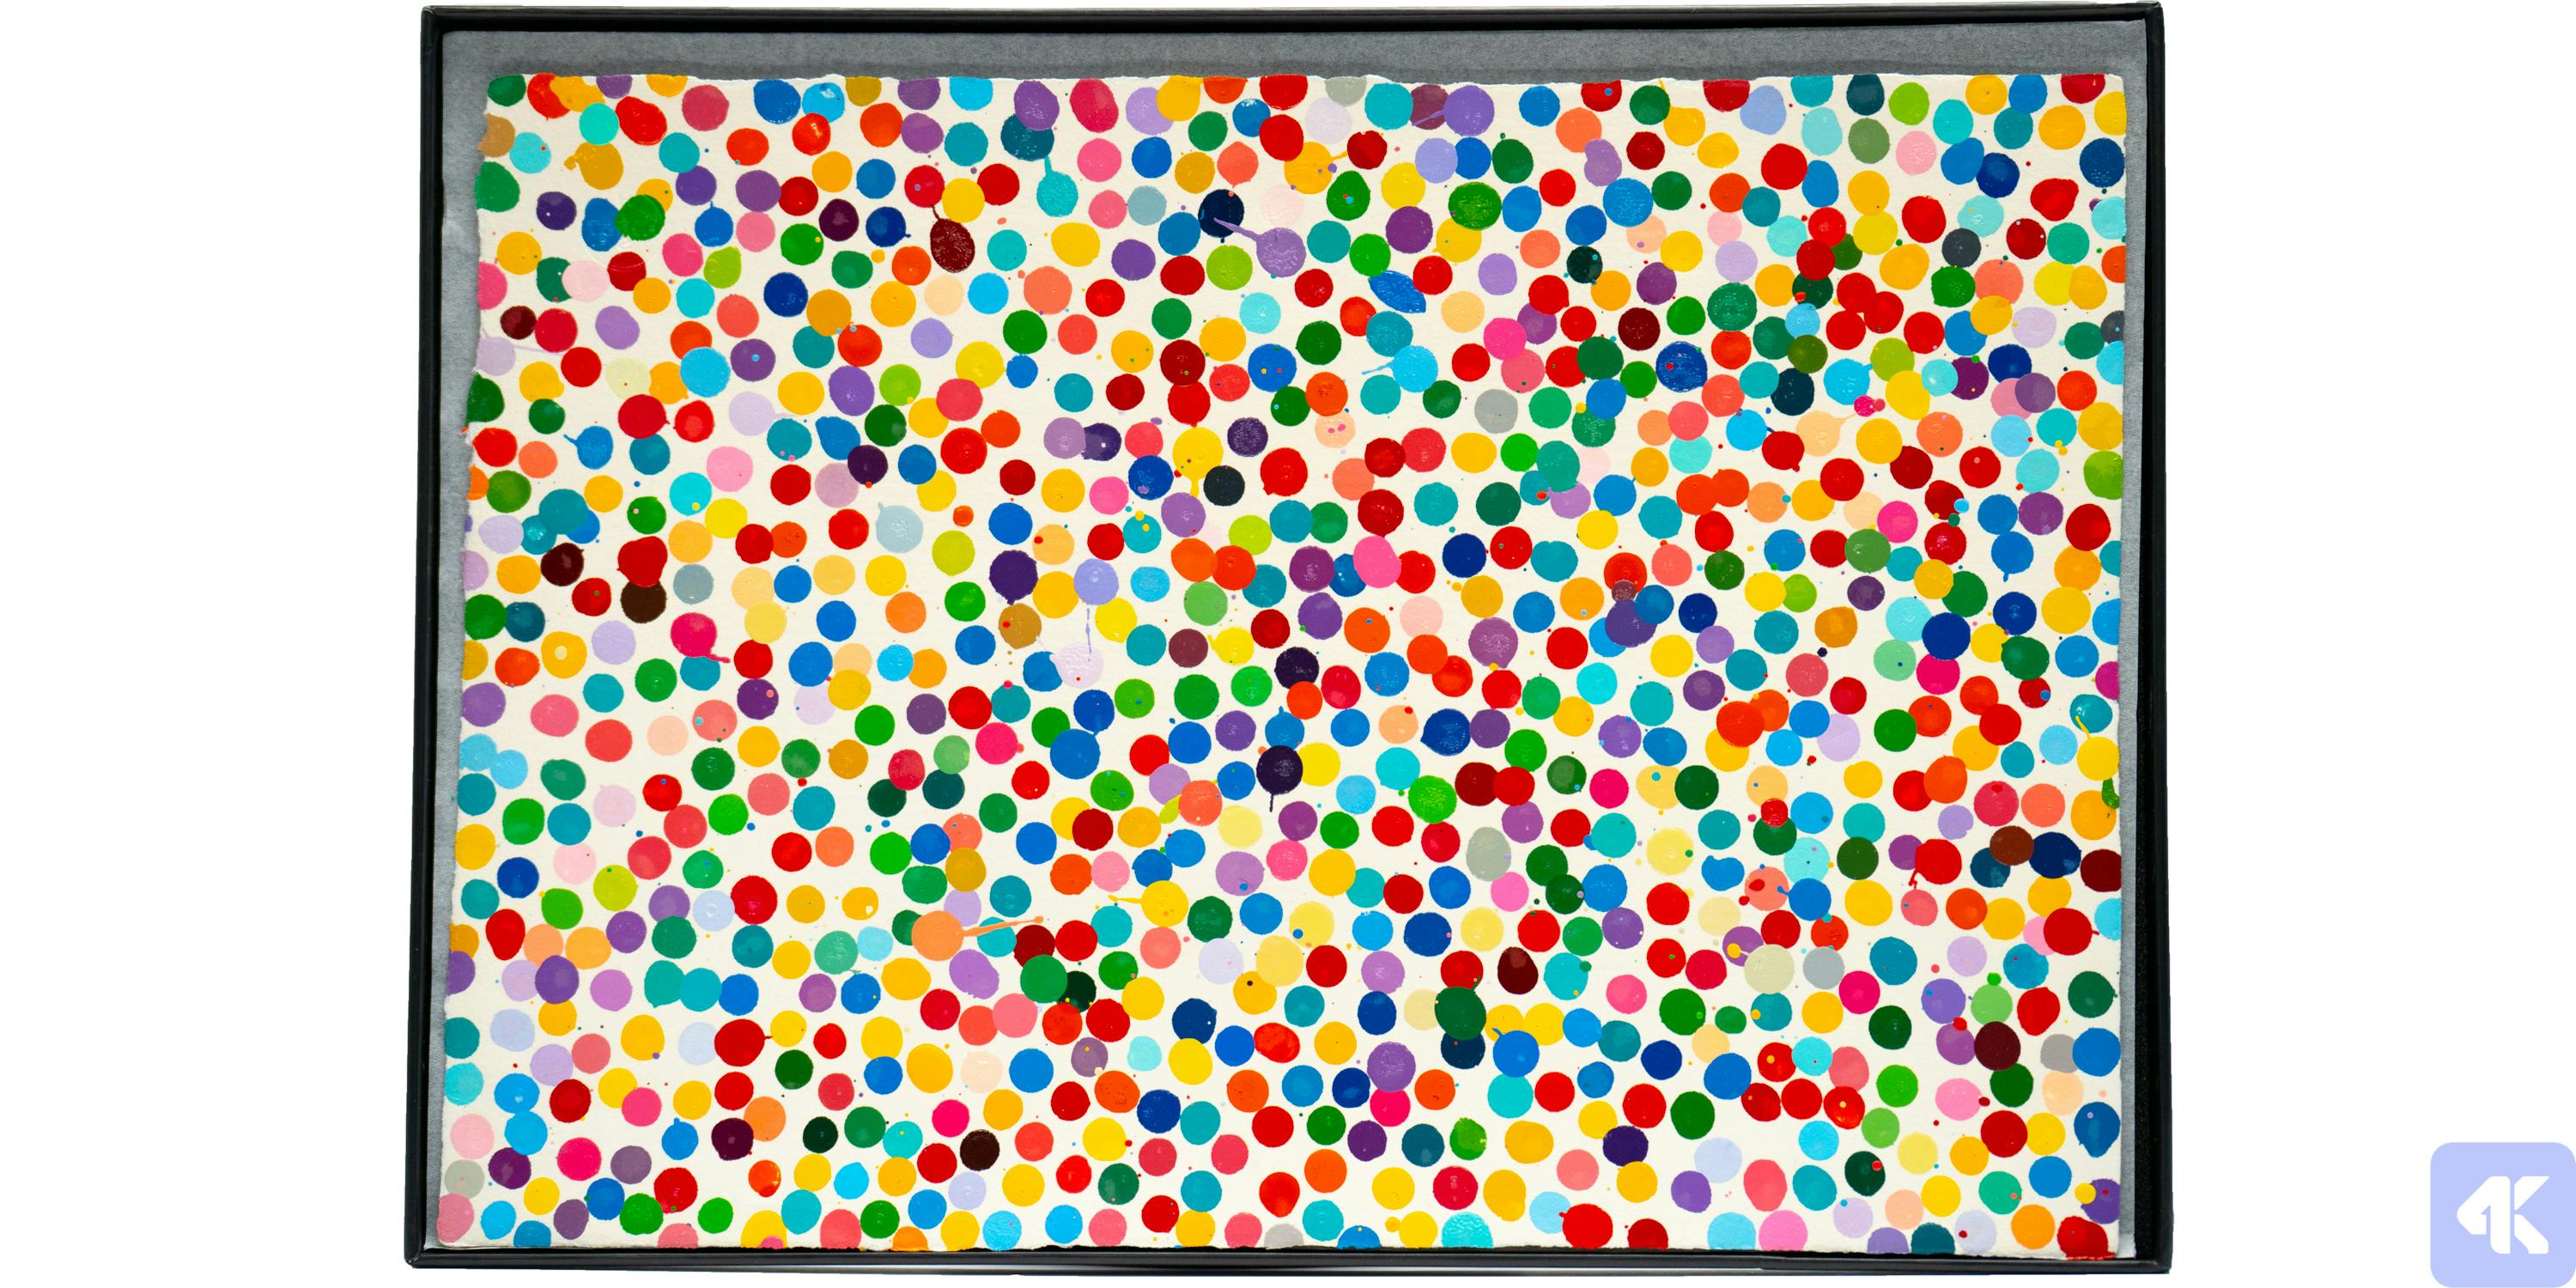 4K is now in possession of one of Damien Hirst’s physical prints from his “The Currency” NFT collection that distinctly crosses the chasm between the digital and physical worlds.